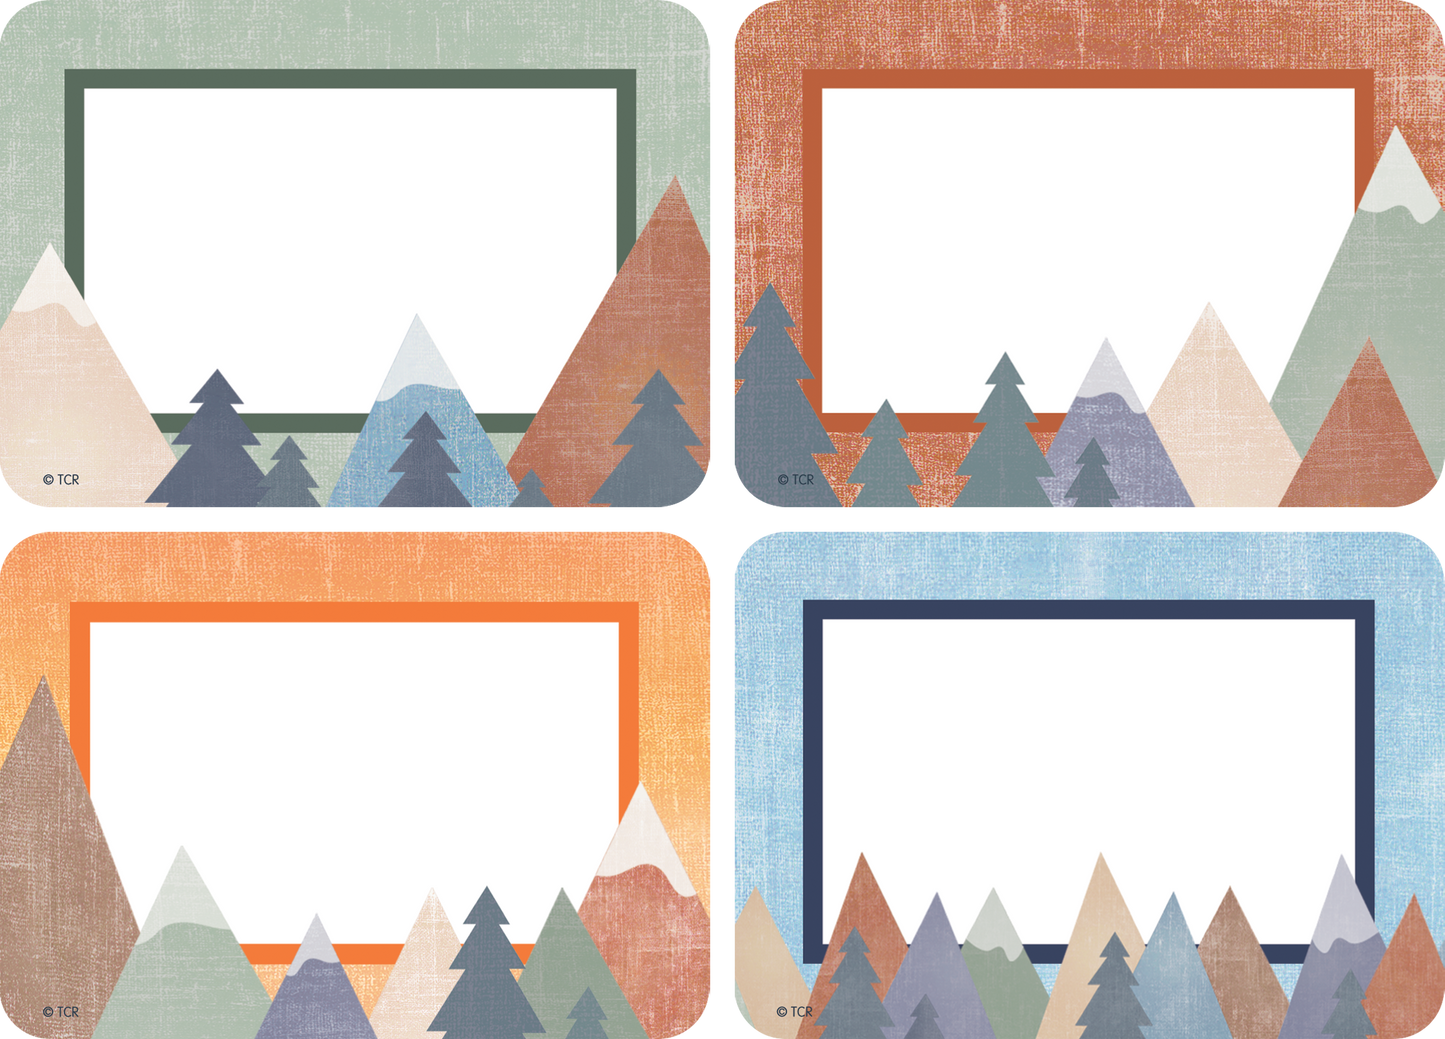 Moving Mountains Name Tags/Labels - Multi-Pack